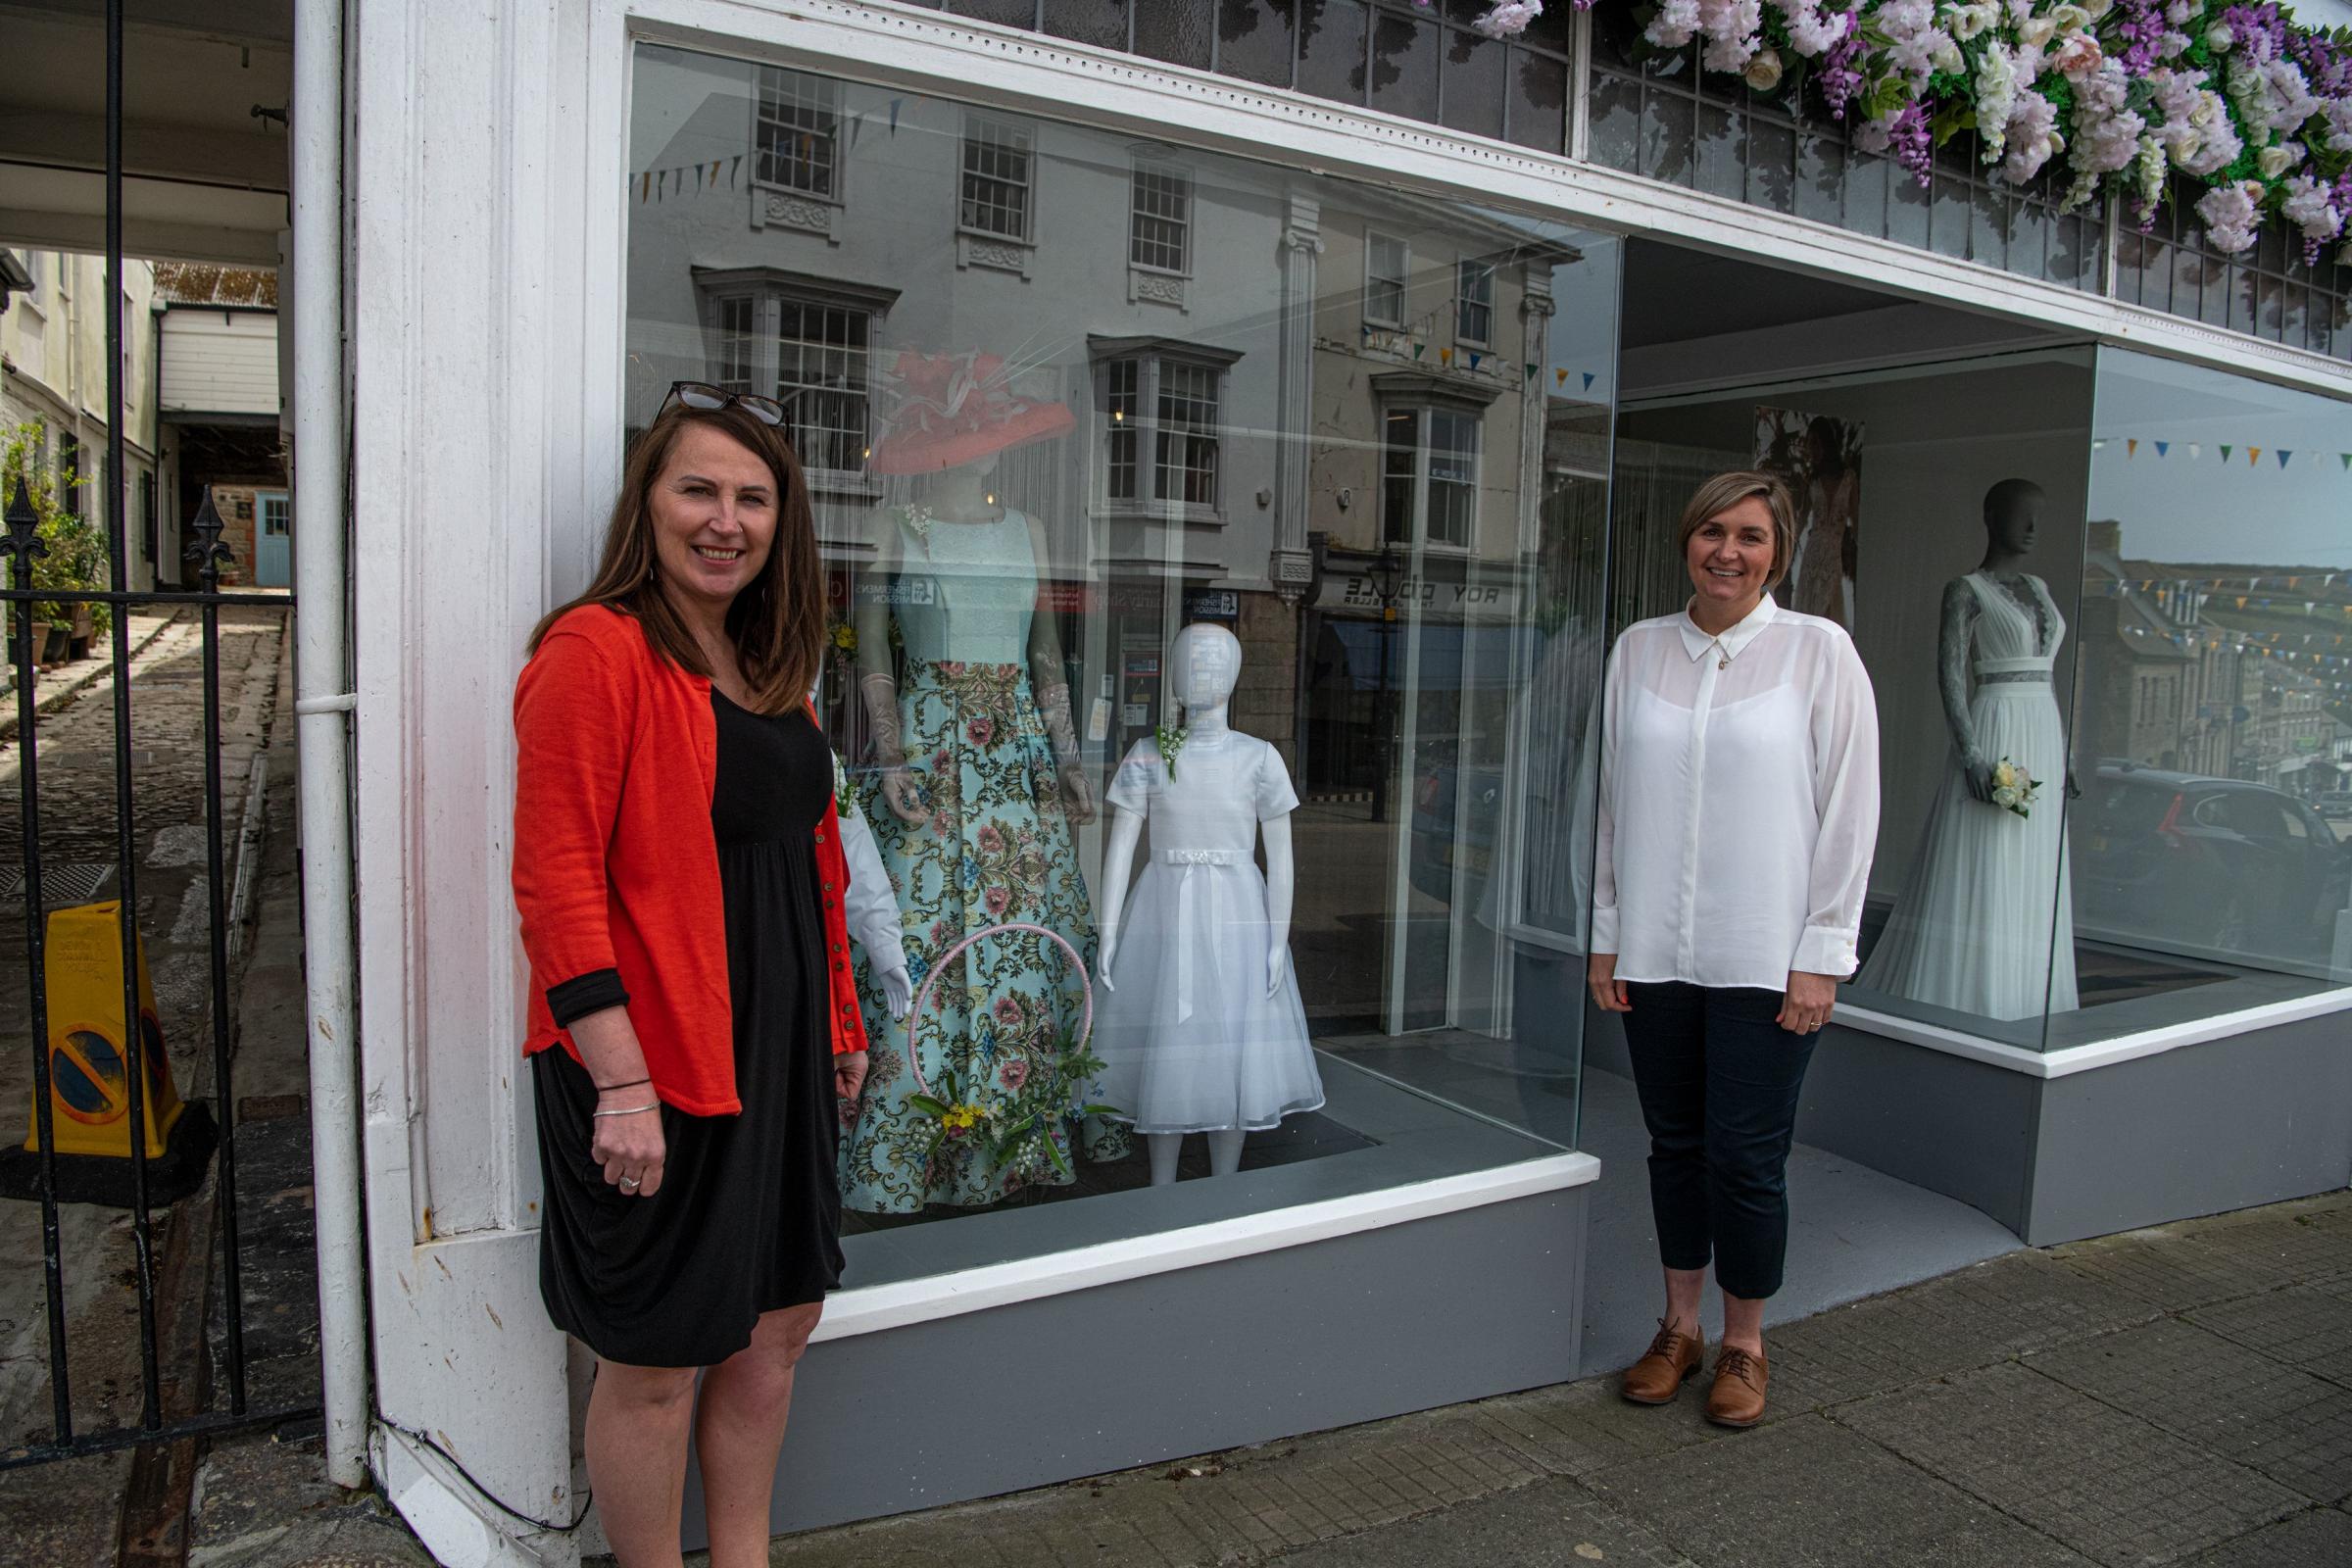 Tara Trethowan and Lucy Paul with the Bridal Studios decorated window. Picture: Kathy White